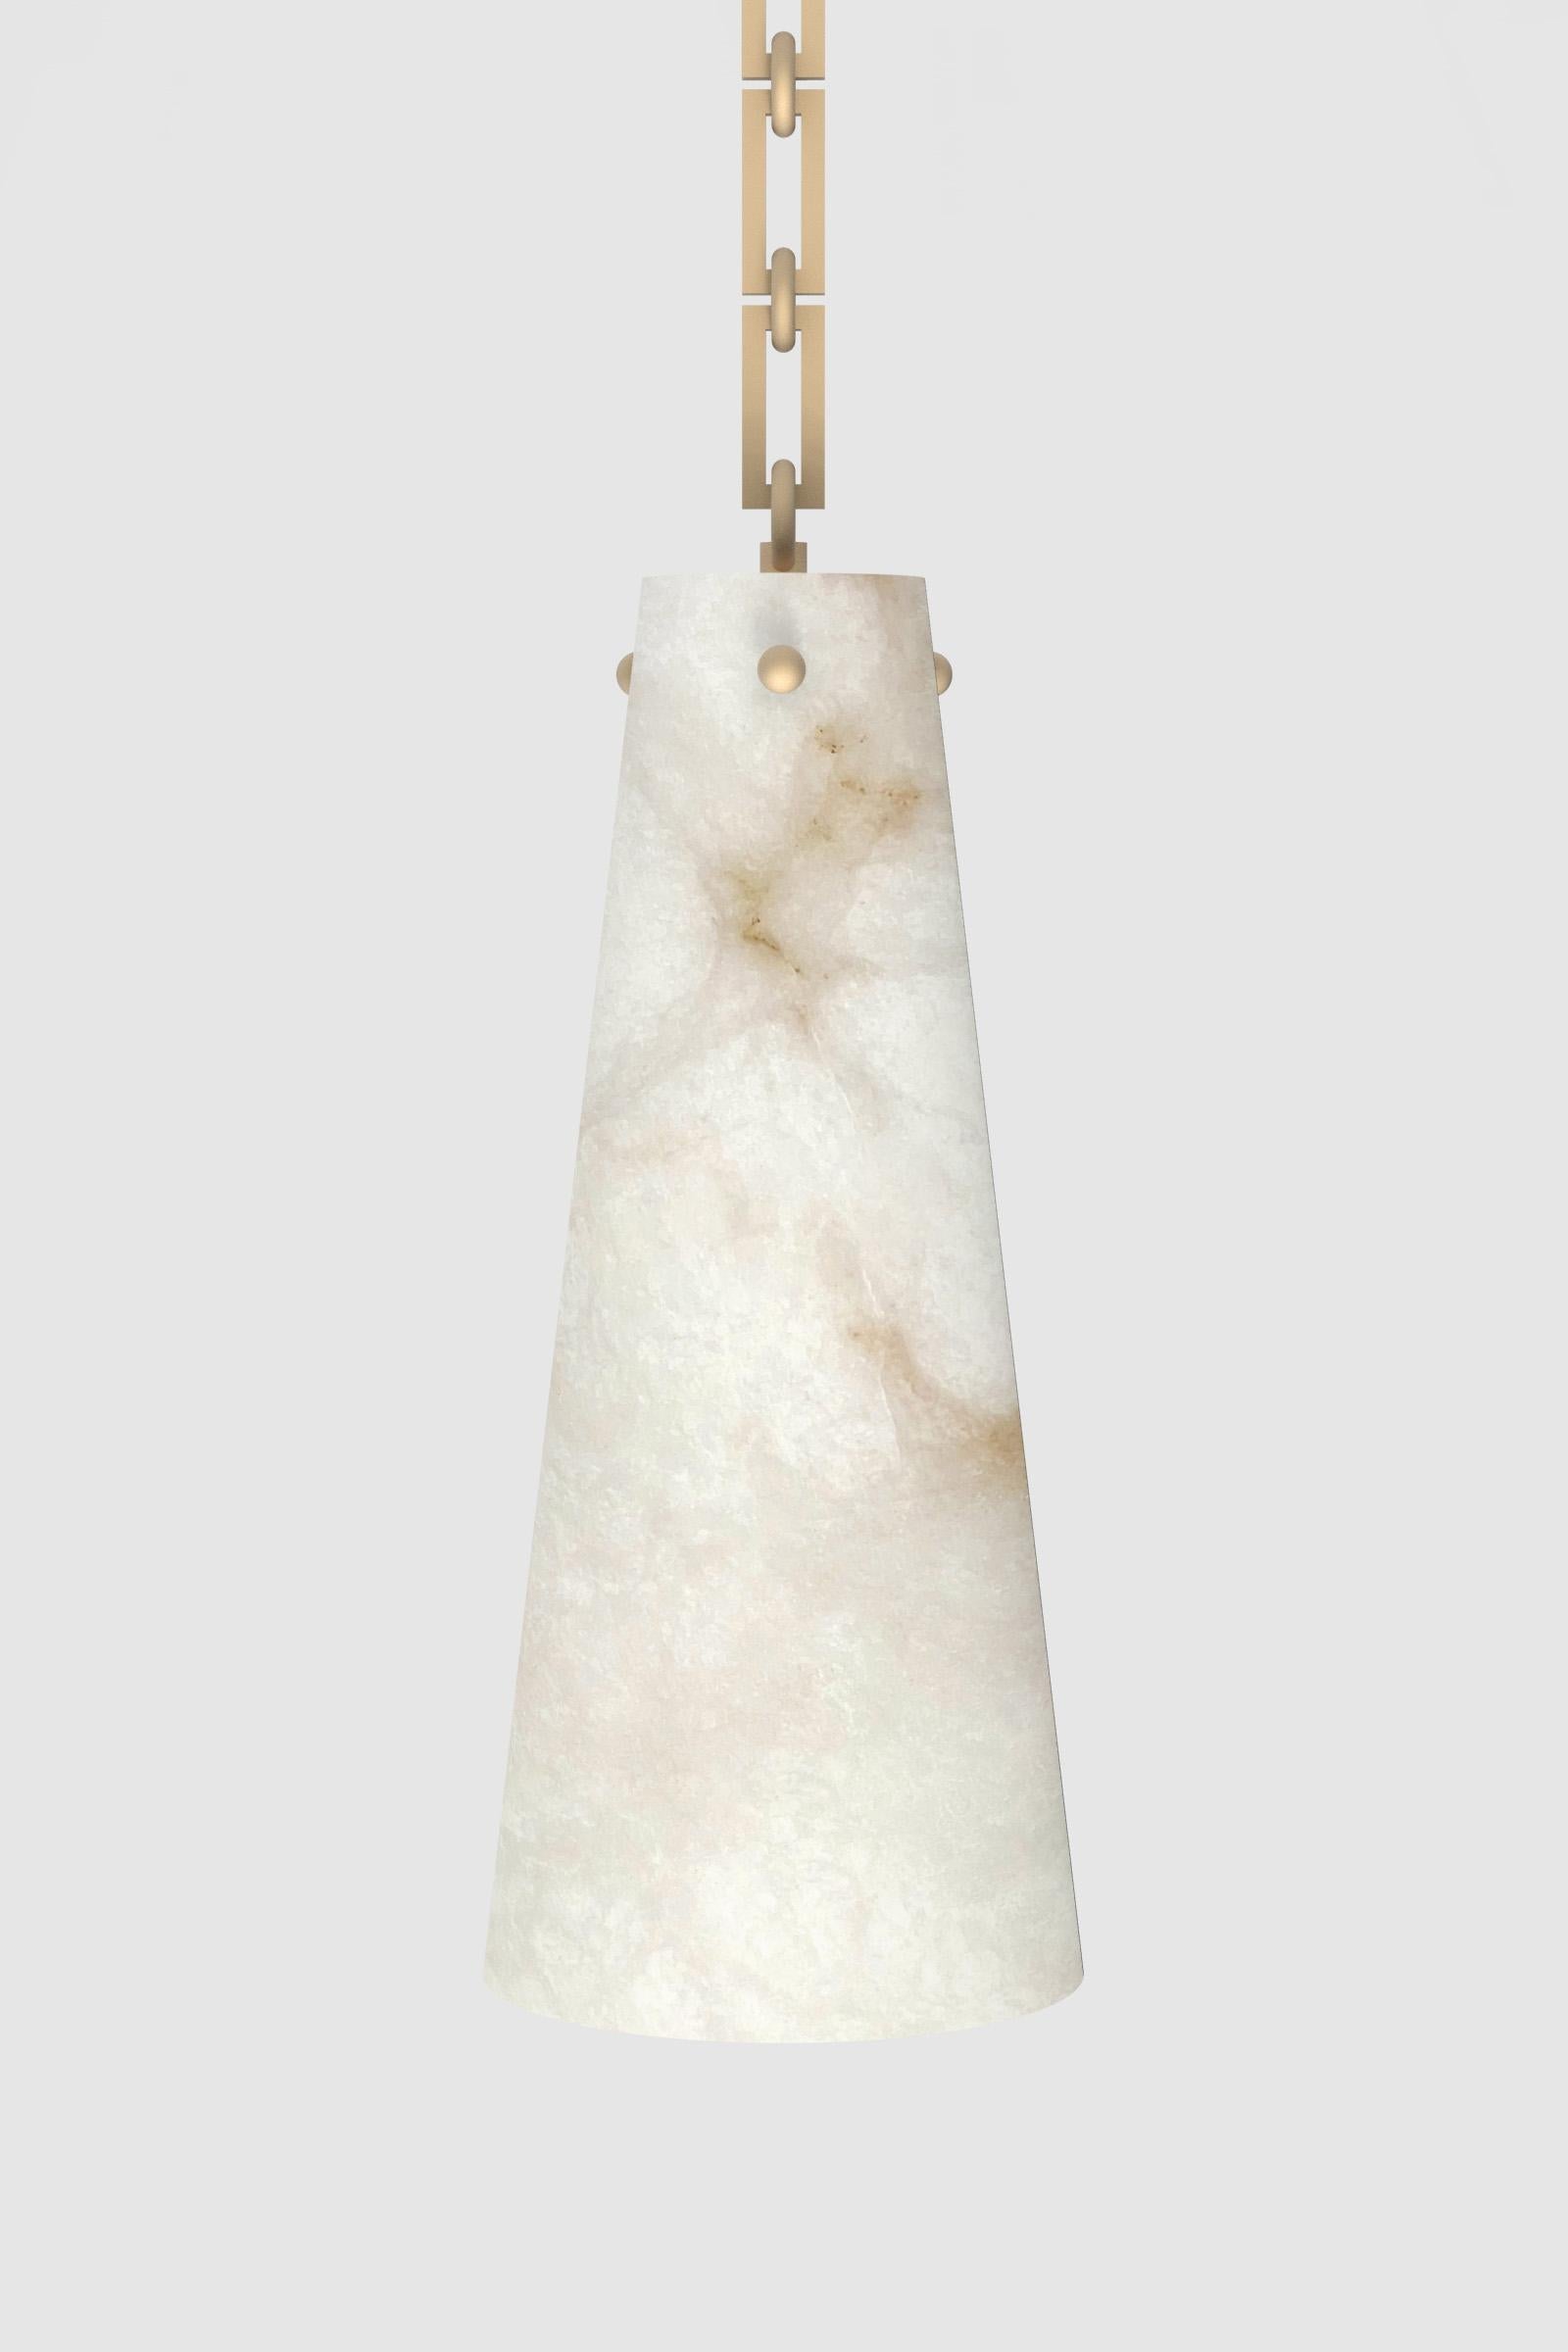 Italian Contemporary Lucca Double Pendant 202A-1S in Alabaster by Orphan Work, 2021 For Sale